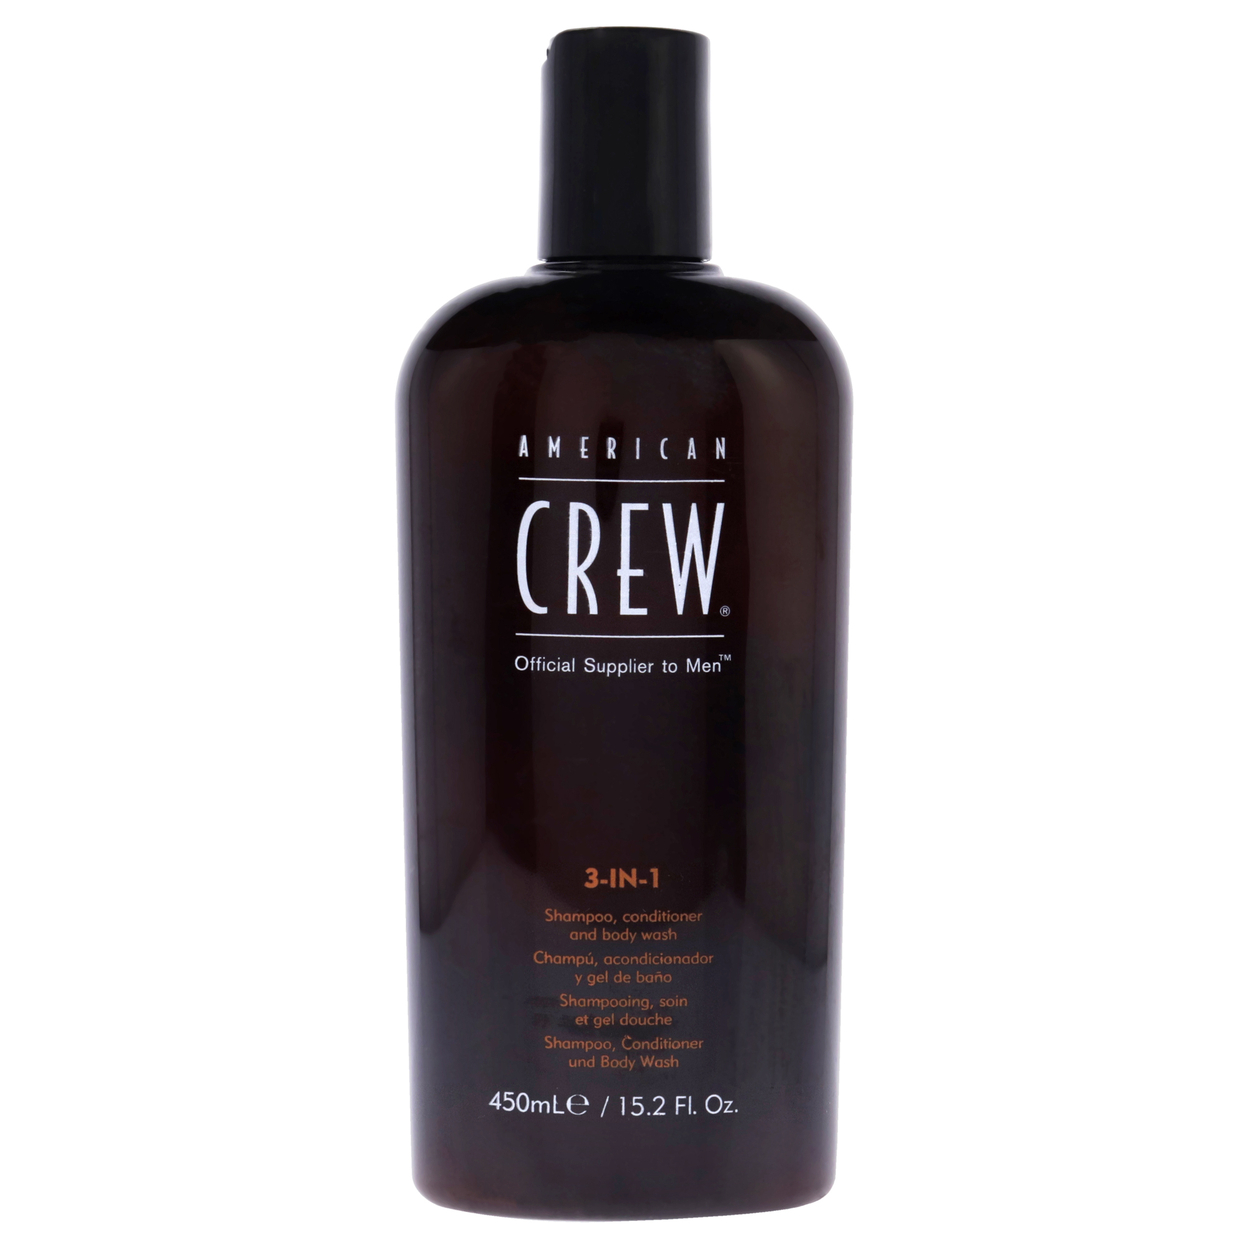 American Crew 3-In-1 Shampoo And Conditoner And Body Wash Shampoo, Conditoner And Body Wash 15.2 Oz